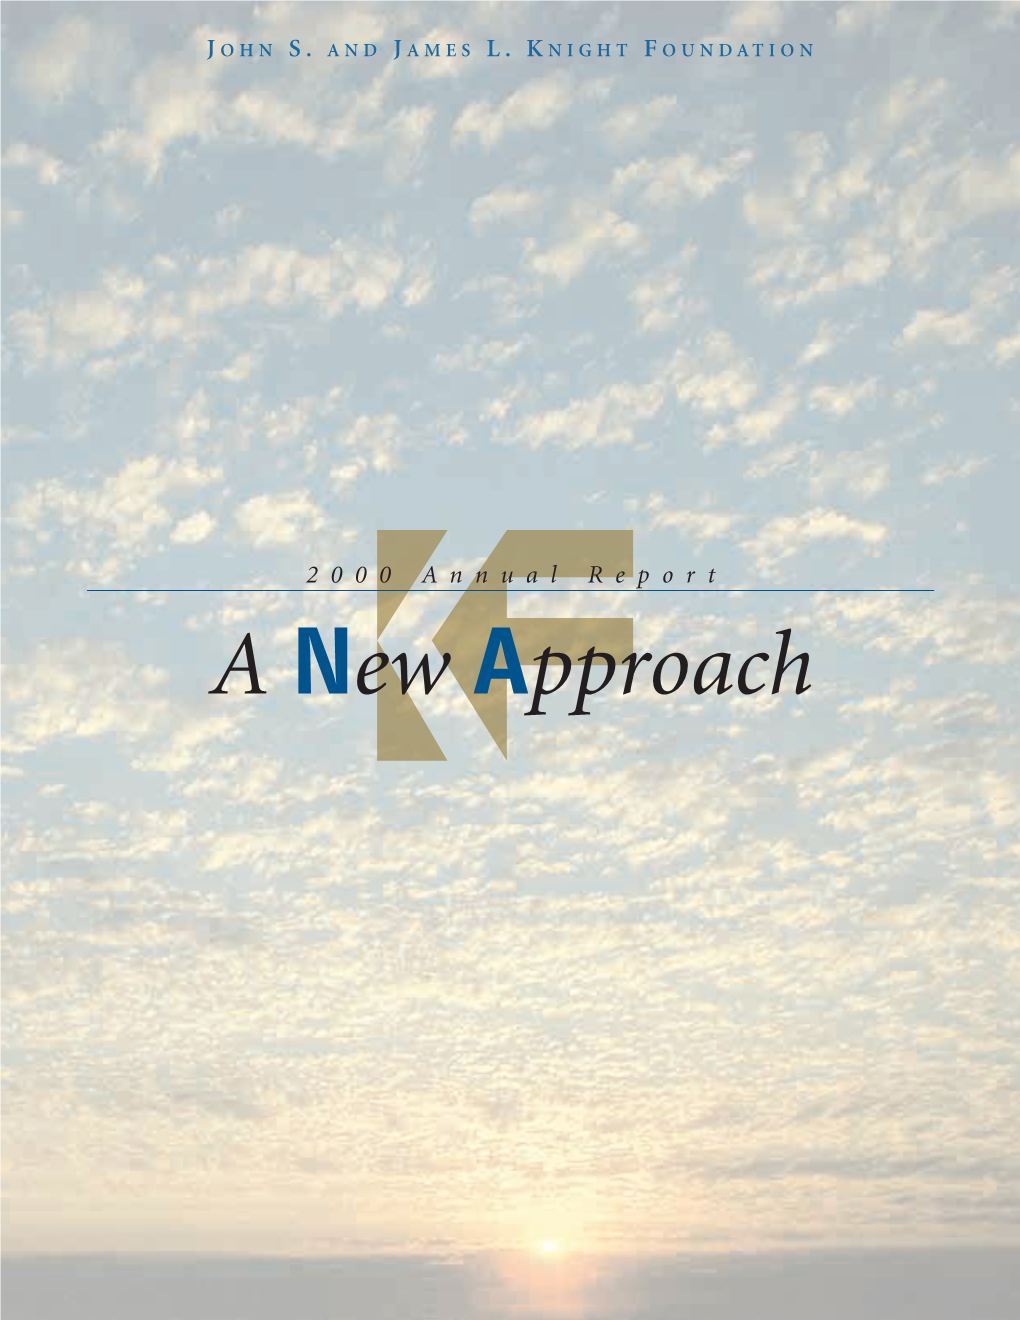 A New Approach Statement of Purpose Table of Contents